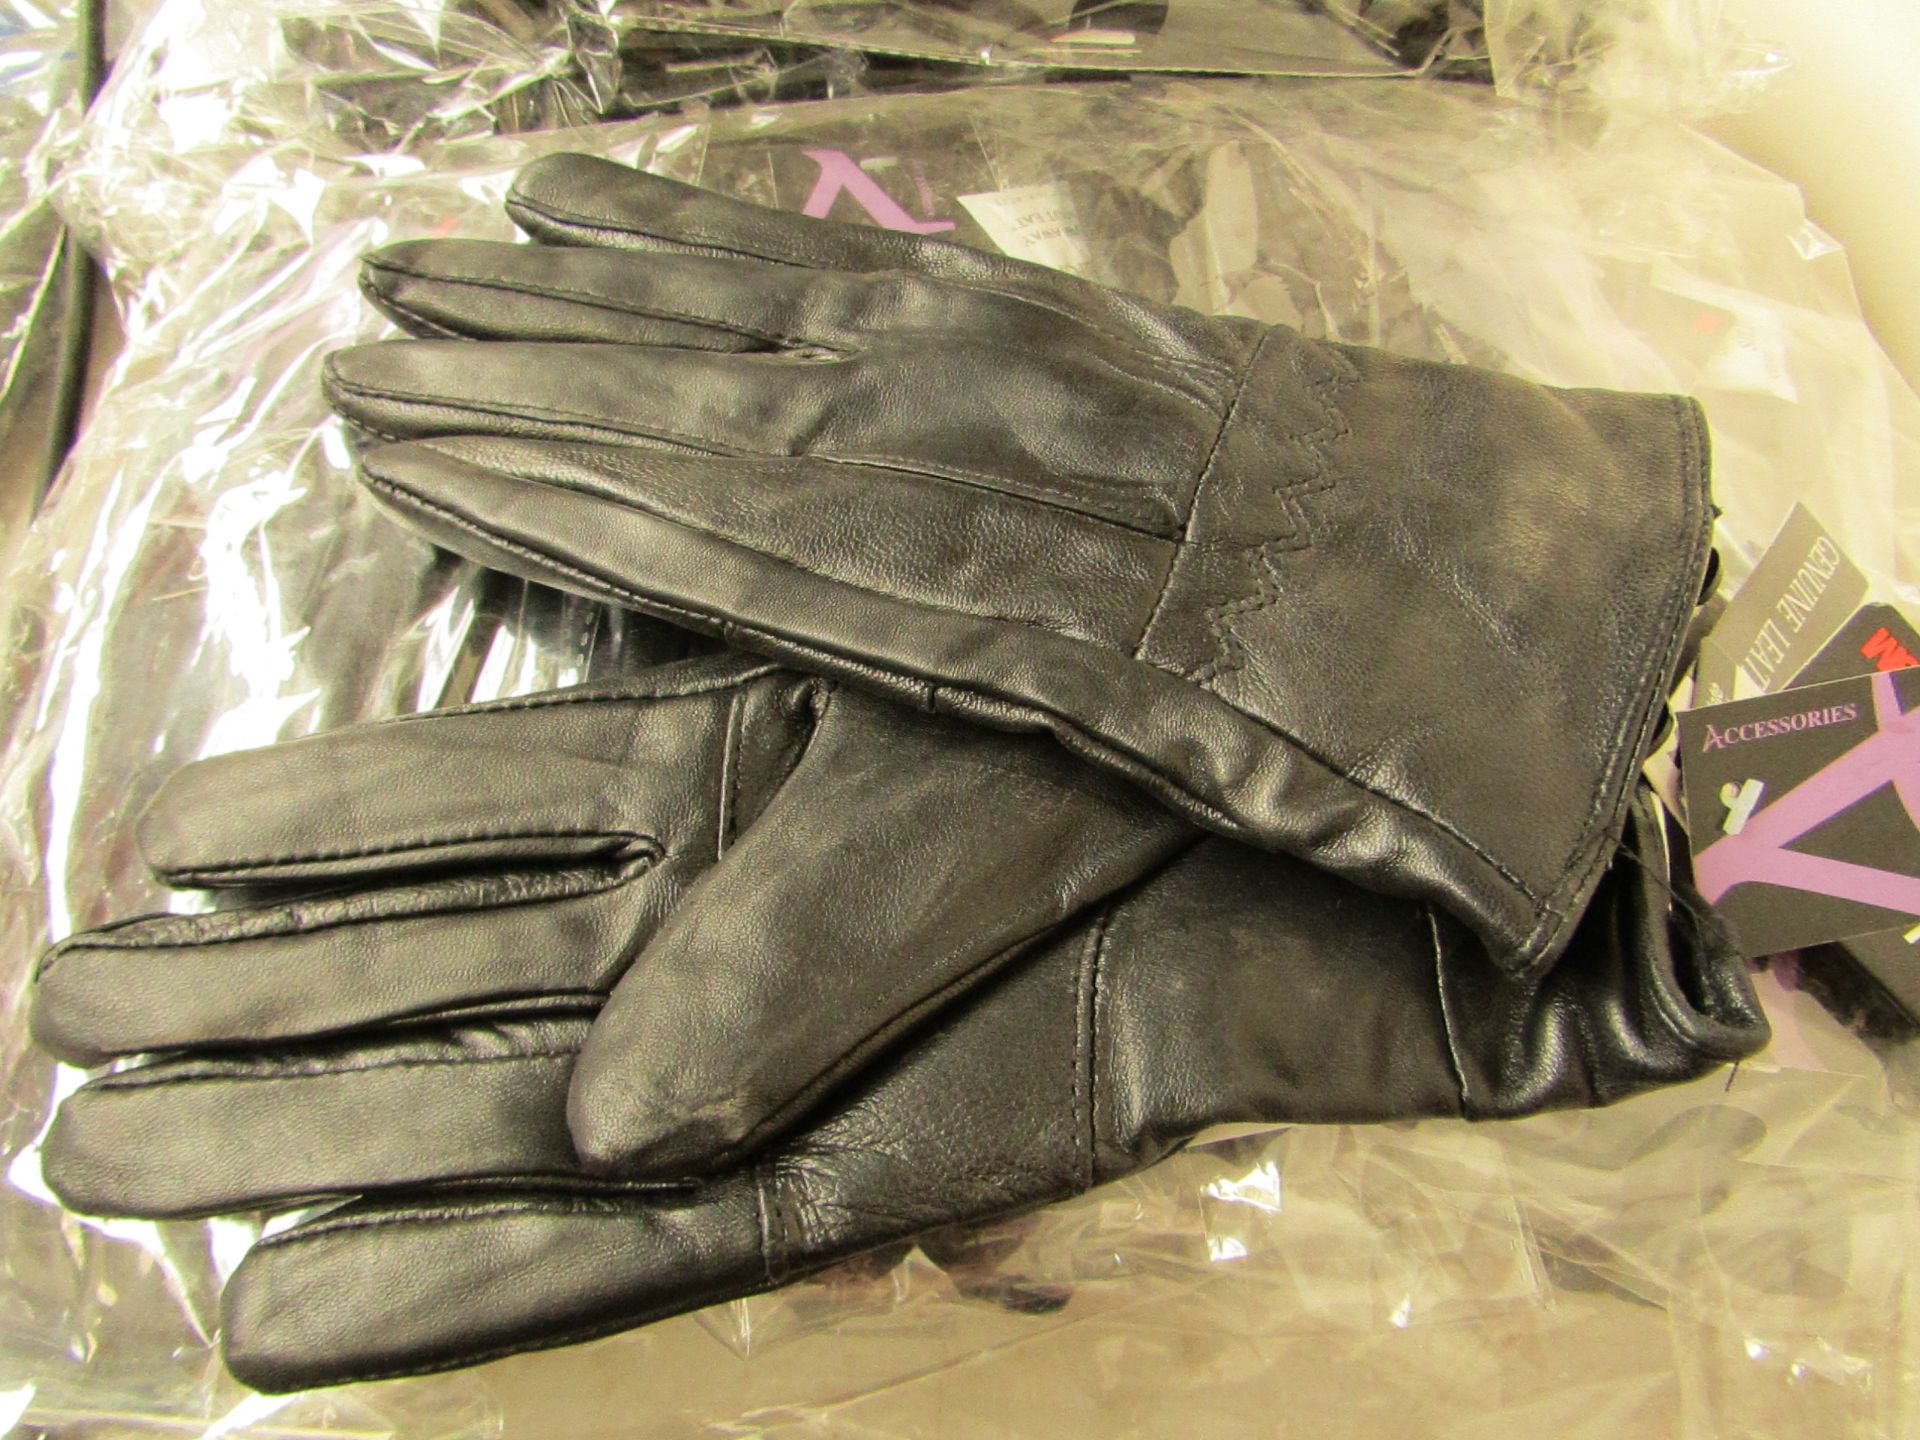 PK 0f 12 Ladies black Leather thinsulate 40 gram gloves one size fits most new in packaging